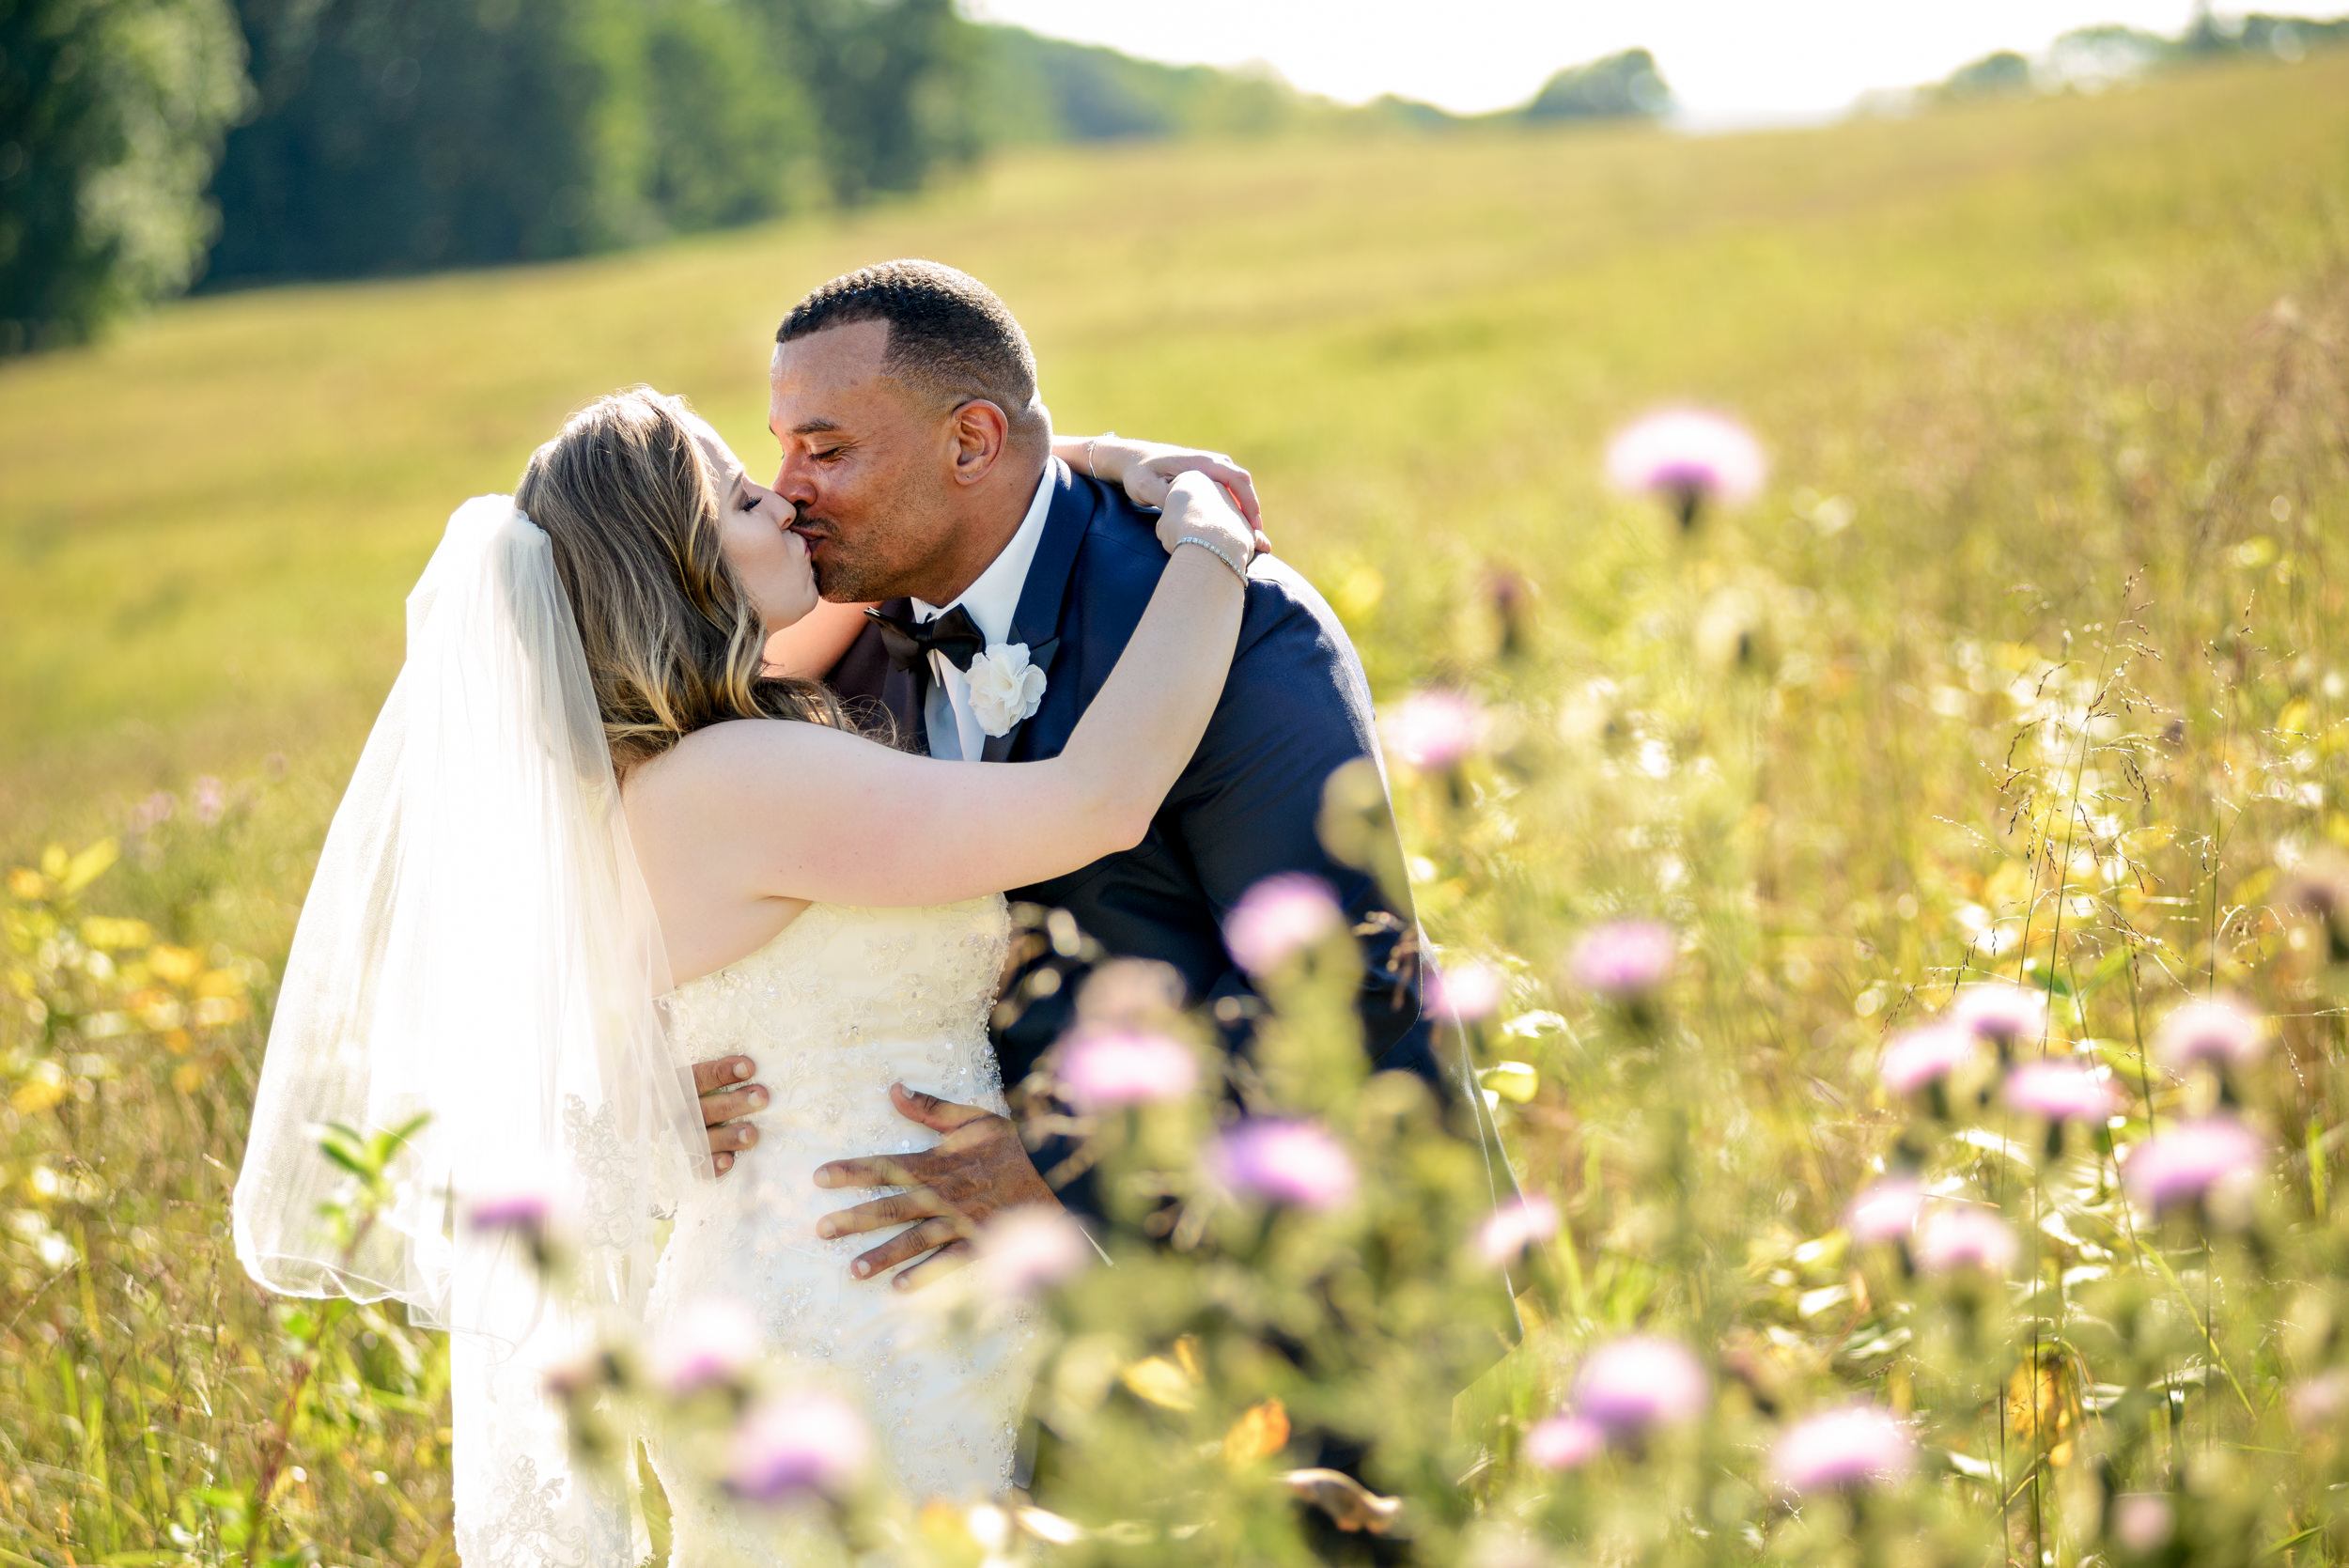 Valley Forge wedding photos - bride and groom in field